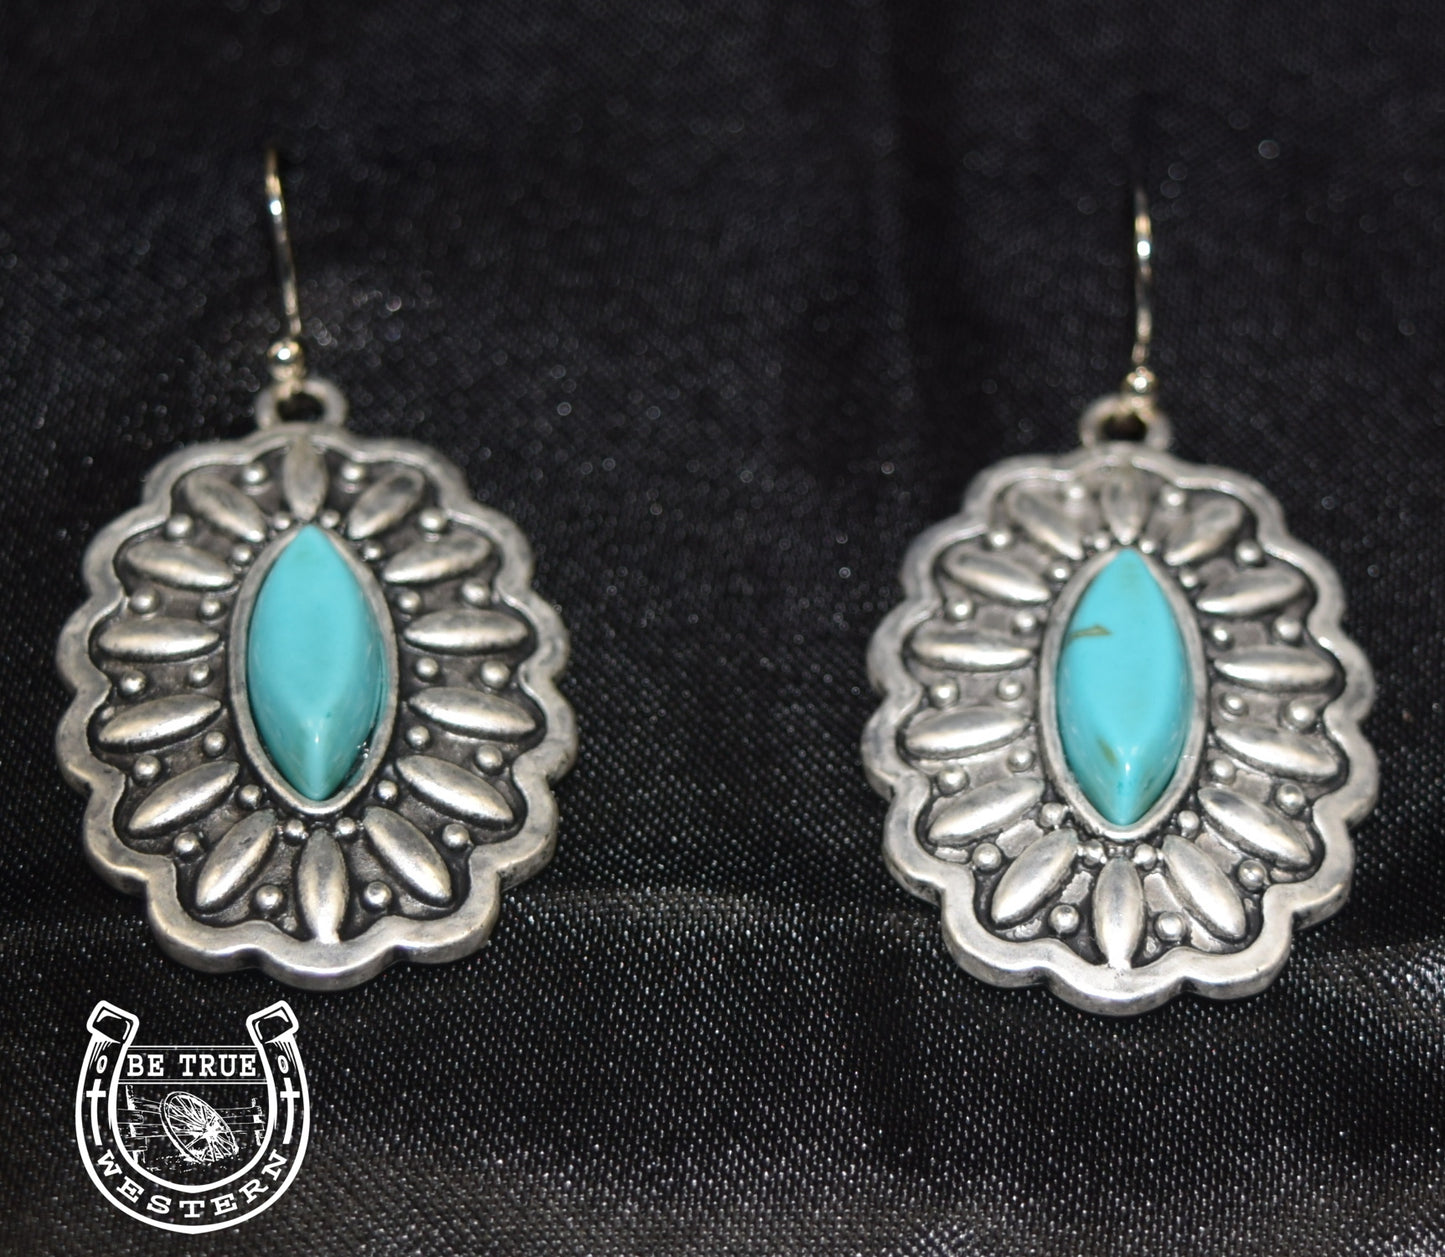 The Turquoise Oval Concho Earrings